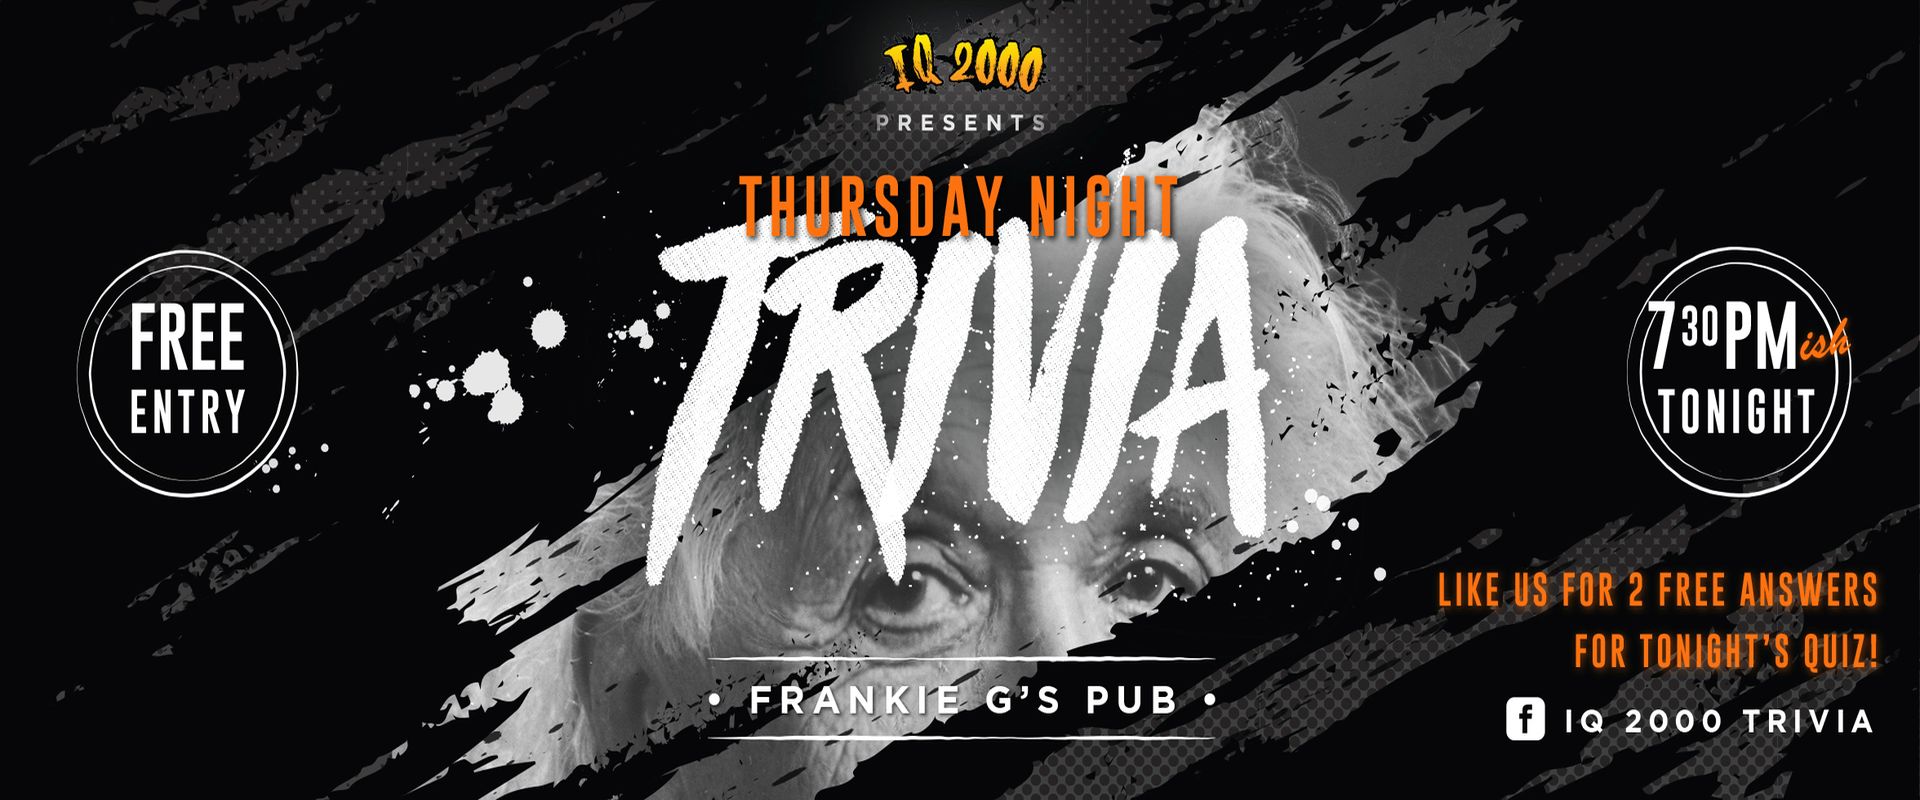 Thursday Night Trivia at Frankie G's Pub, New Westminster, British Columbia, Canada